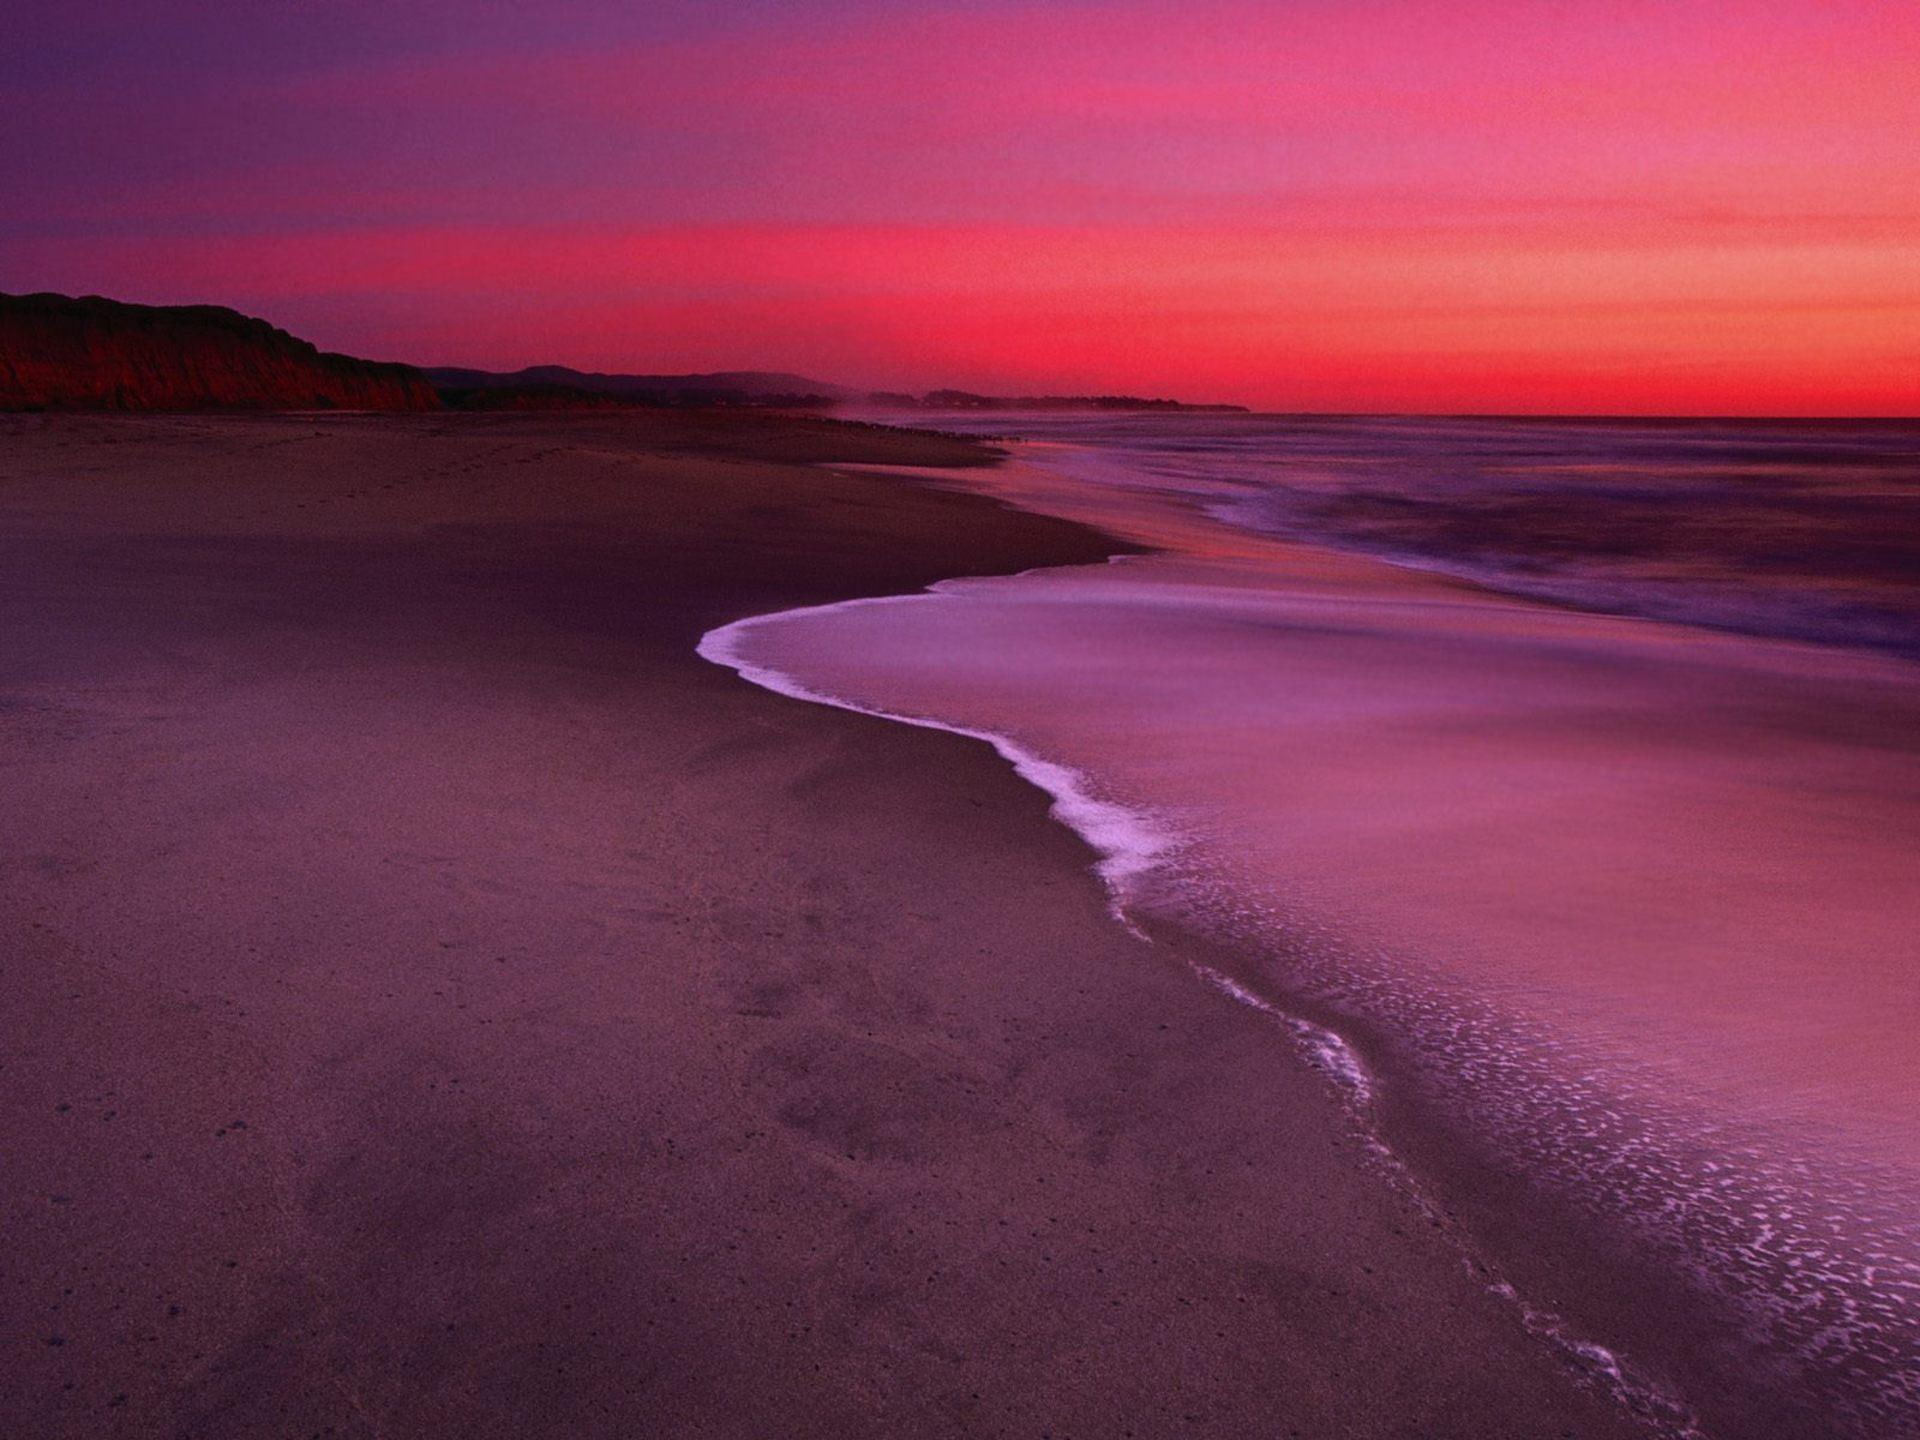 Dunes Beach, Half Moon Bay, California, beaches, sunsets, nature and landscapes